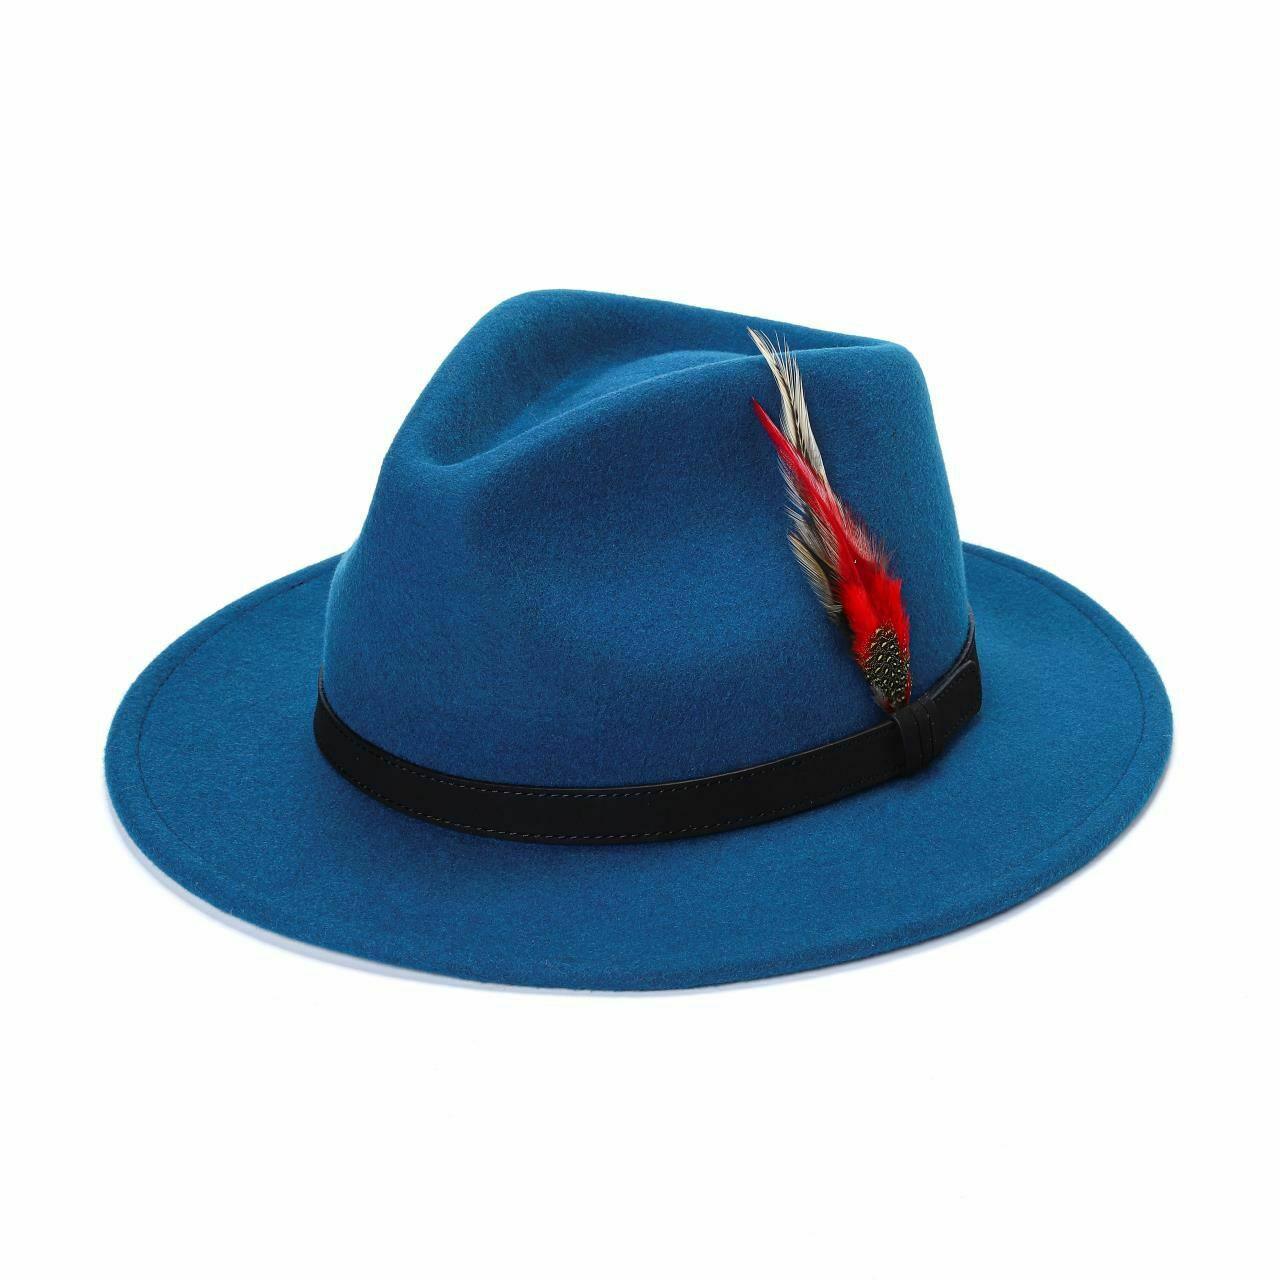 Adults Turquoise Fedora Hat 100% Wool Felt Hats Feather Summer Cap Adjustable Band Hat - House Of Fashion Wear